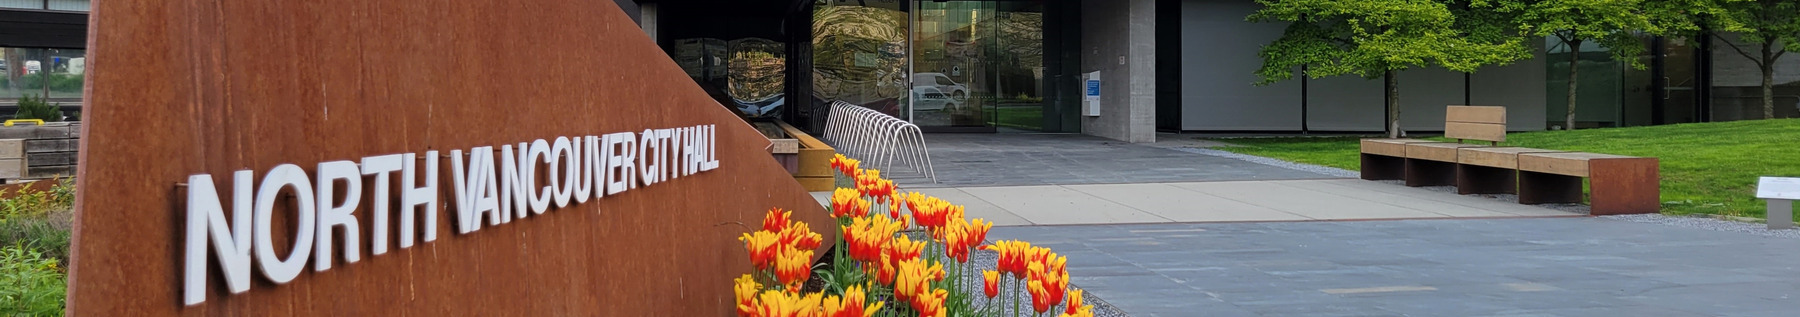 Exterior of City Hall with tulips